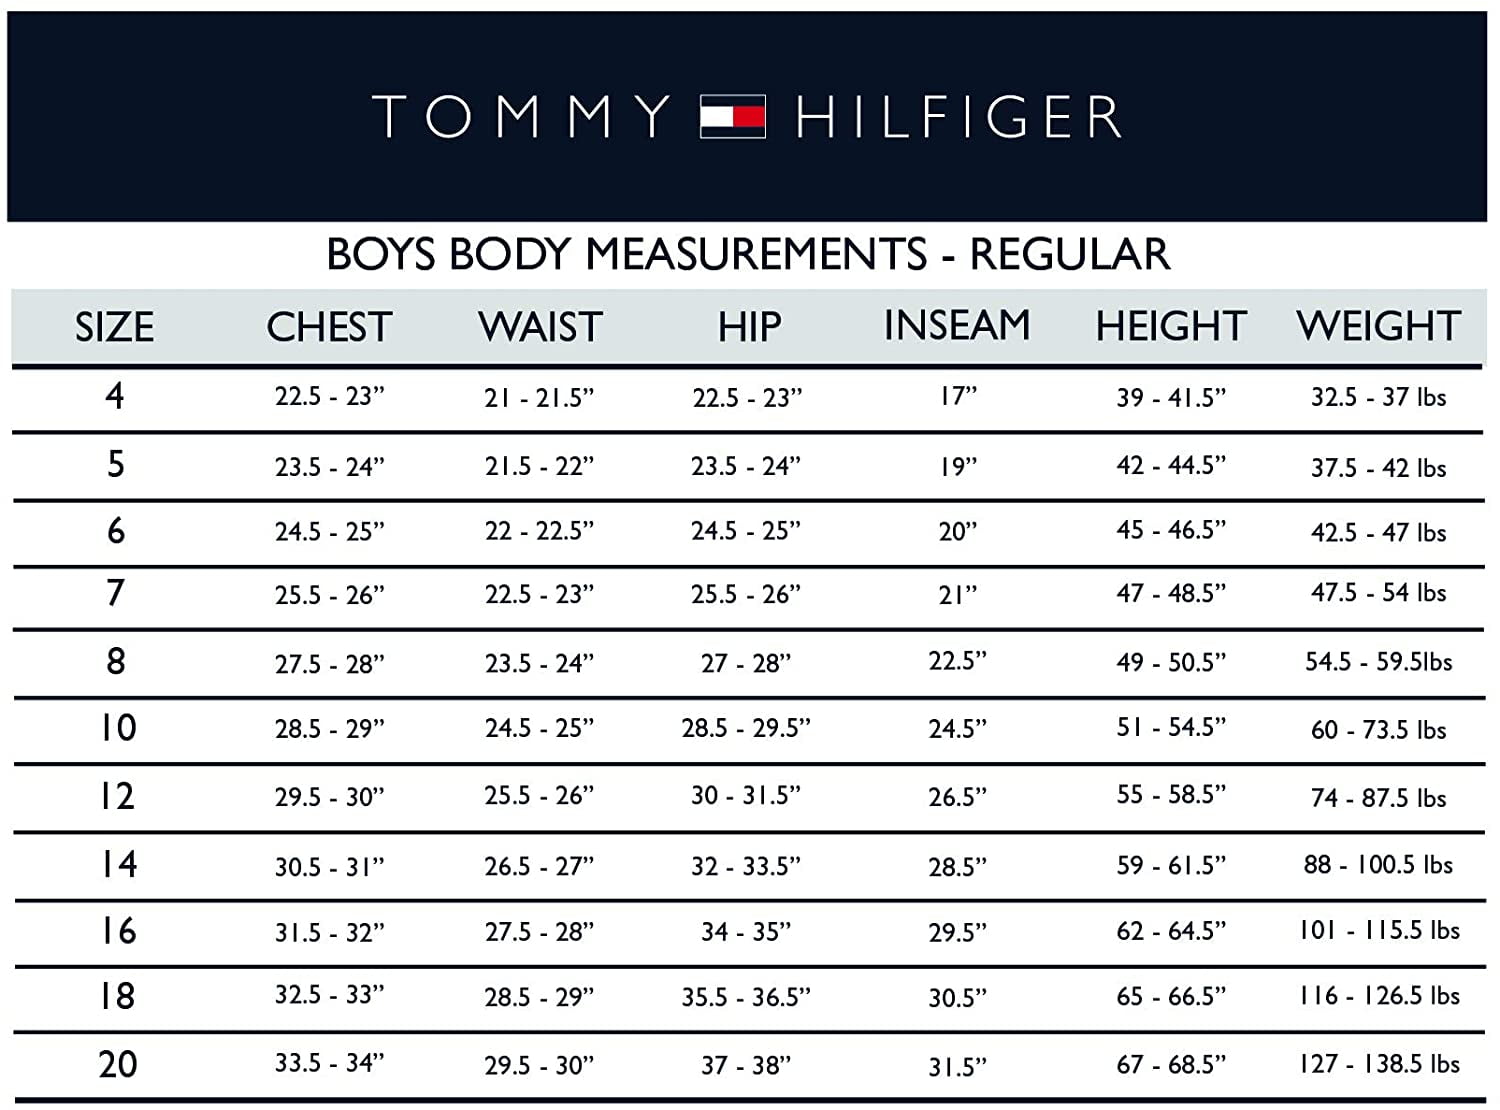 tommy hilfiger polo size guide